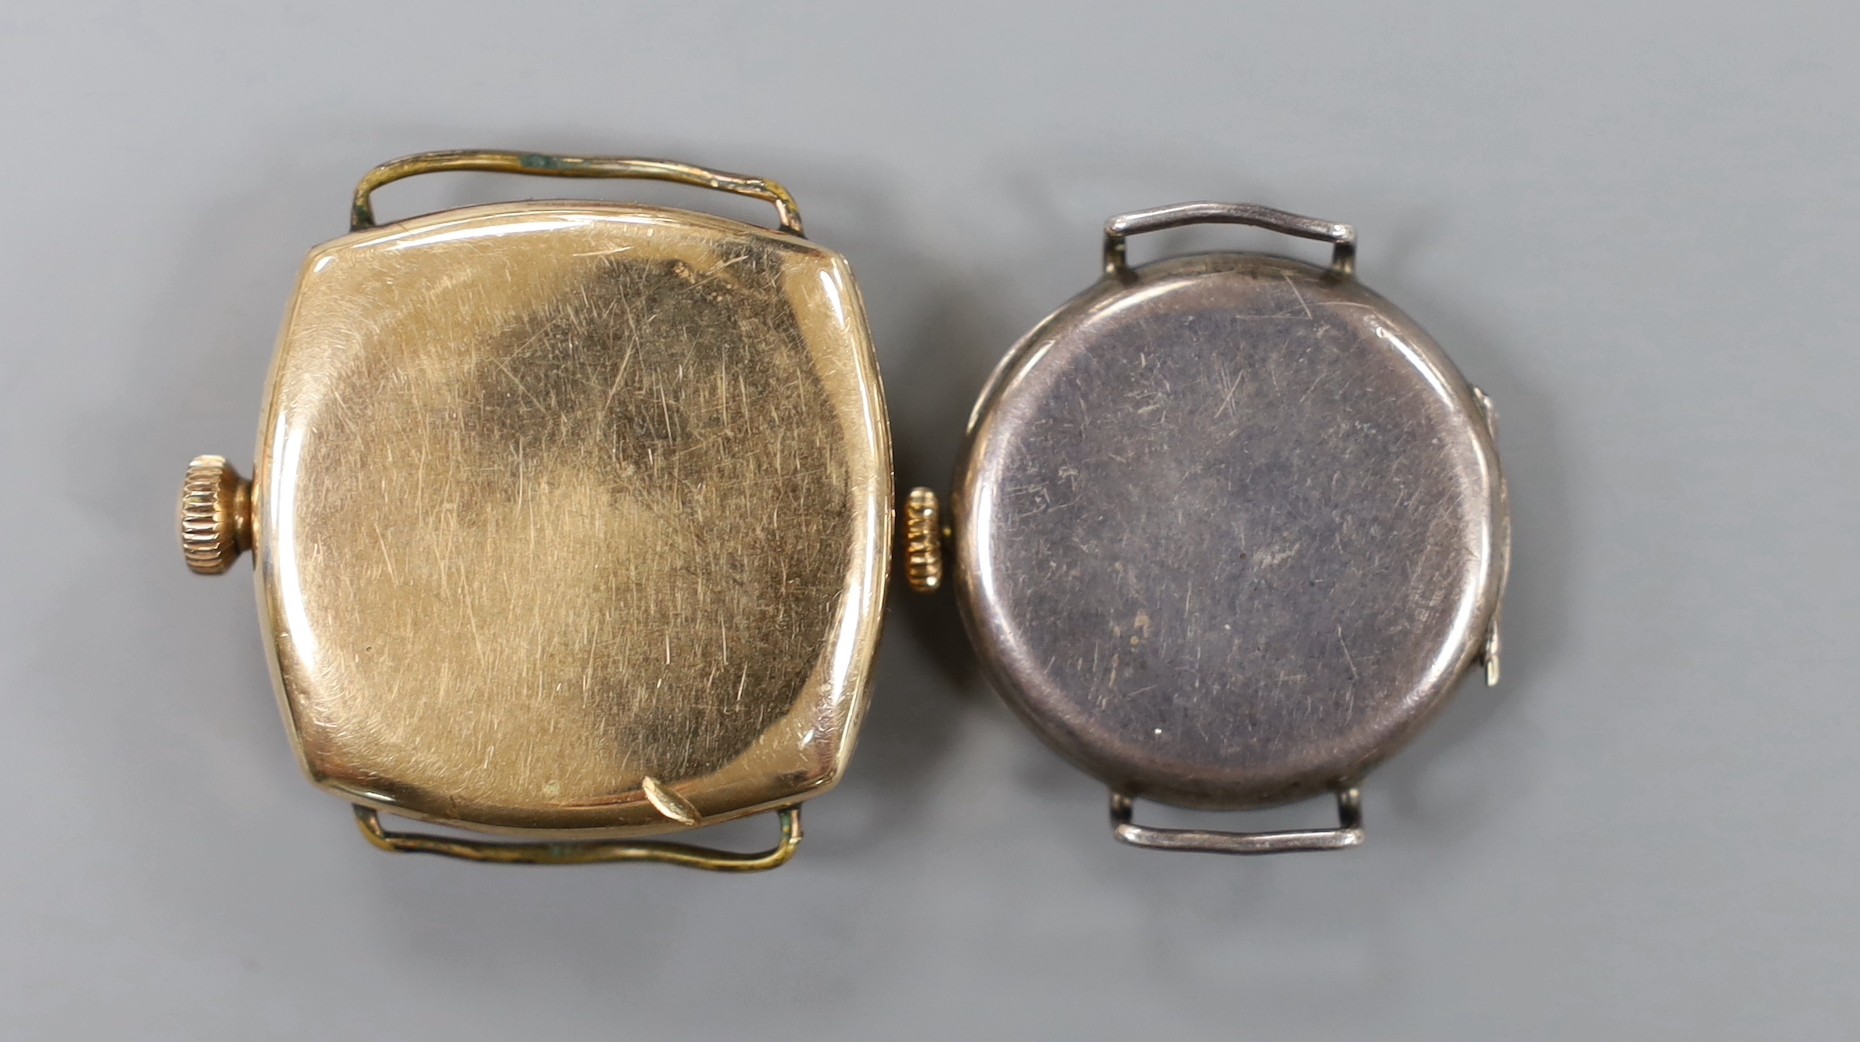 A gentleman's gold plated Waltham manual wind wrist watch and a silver manual wind wrist watch, both without straps.